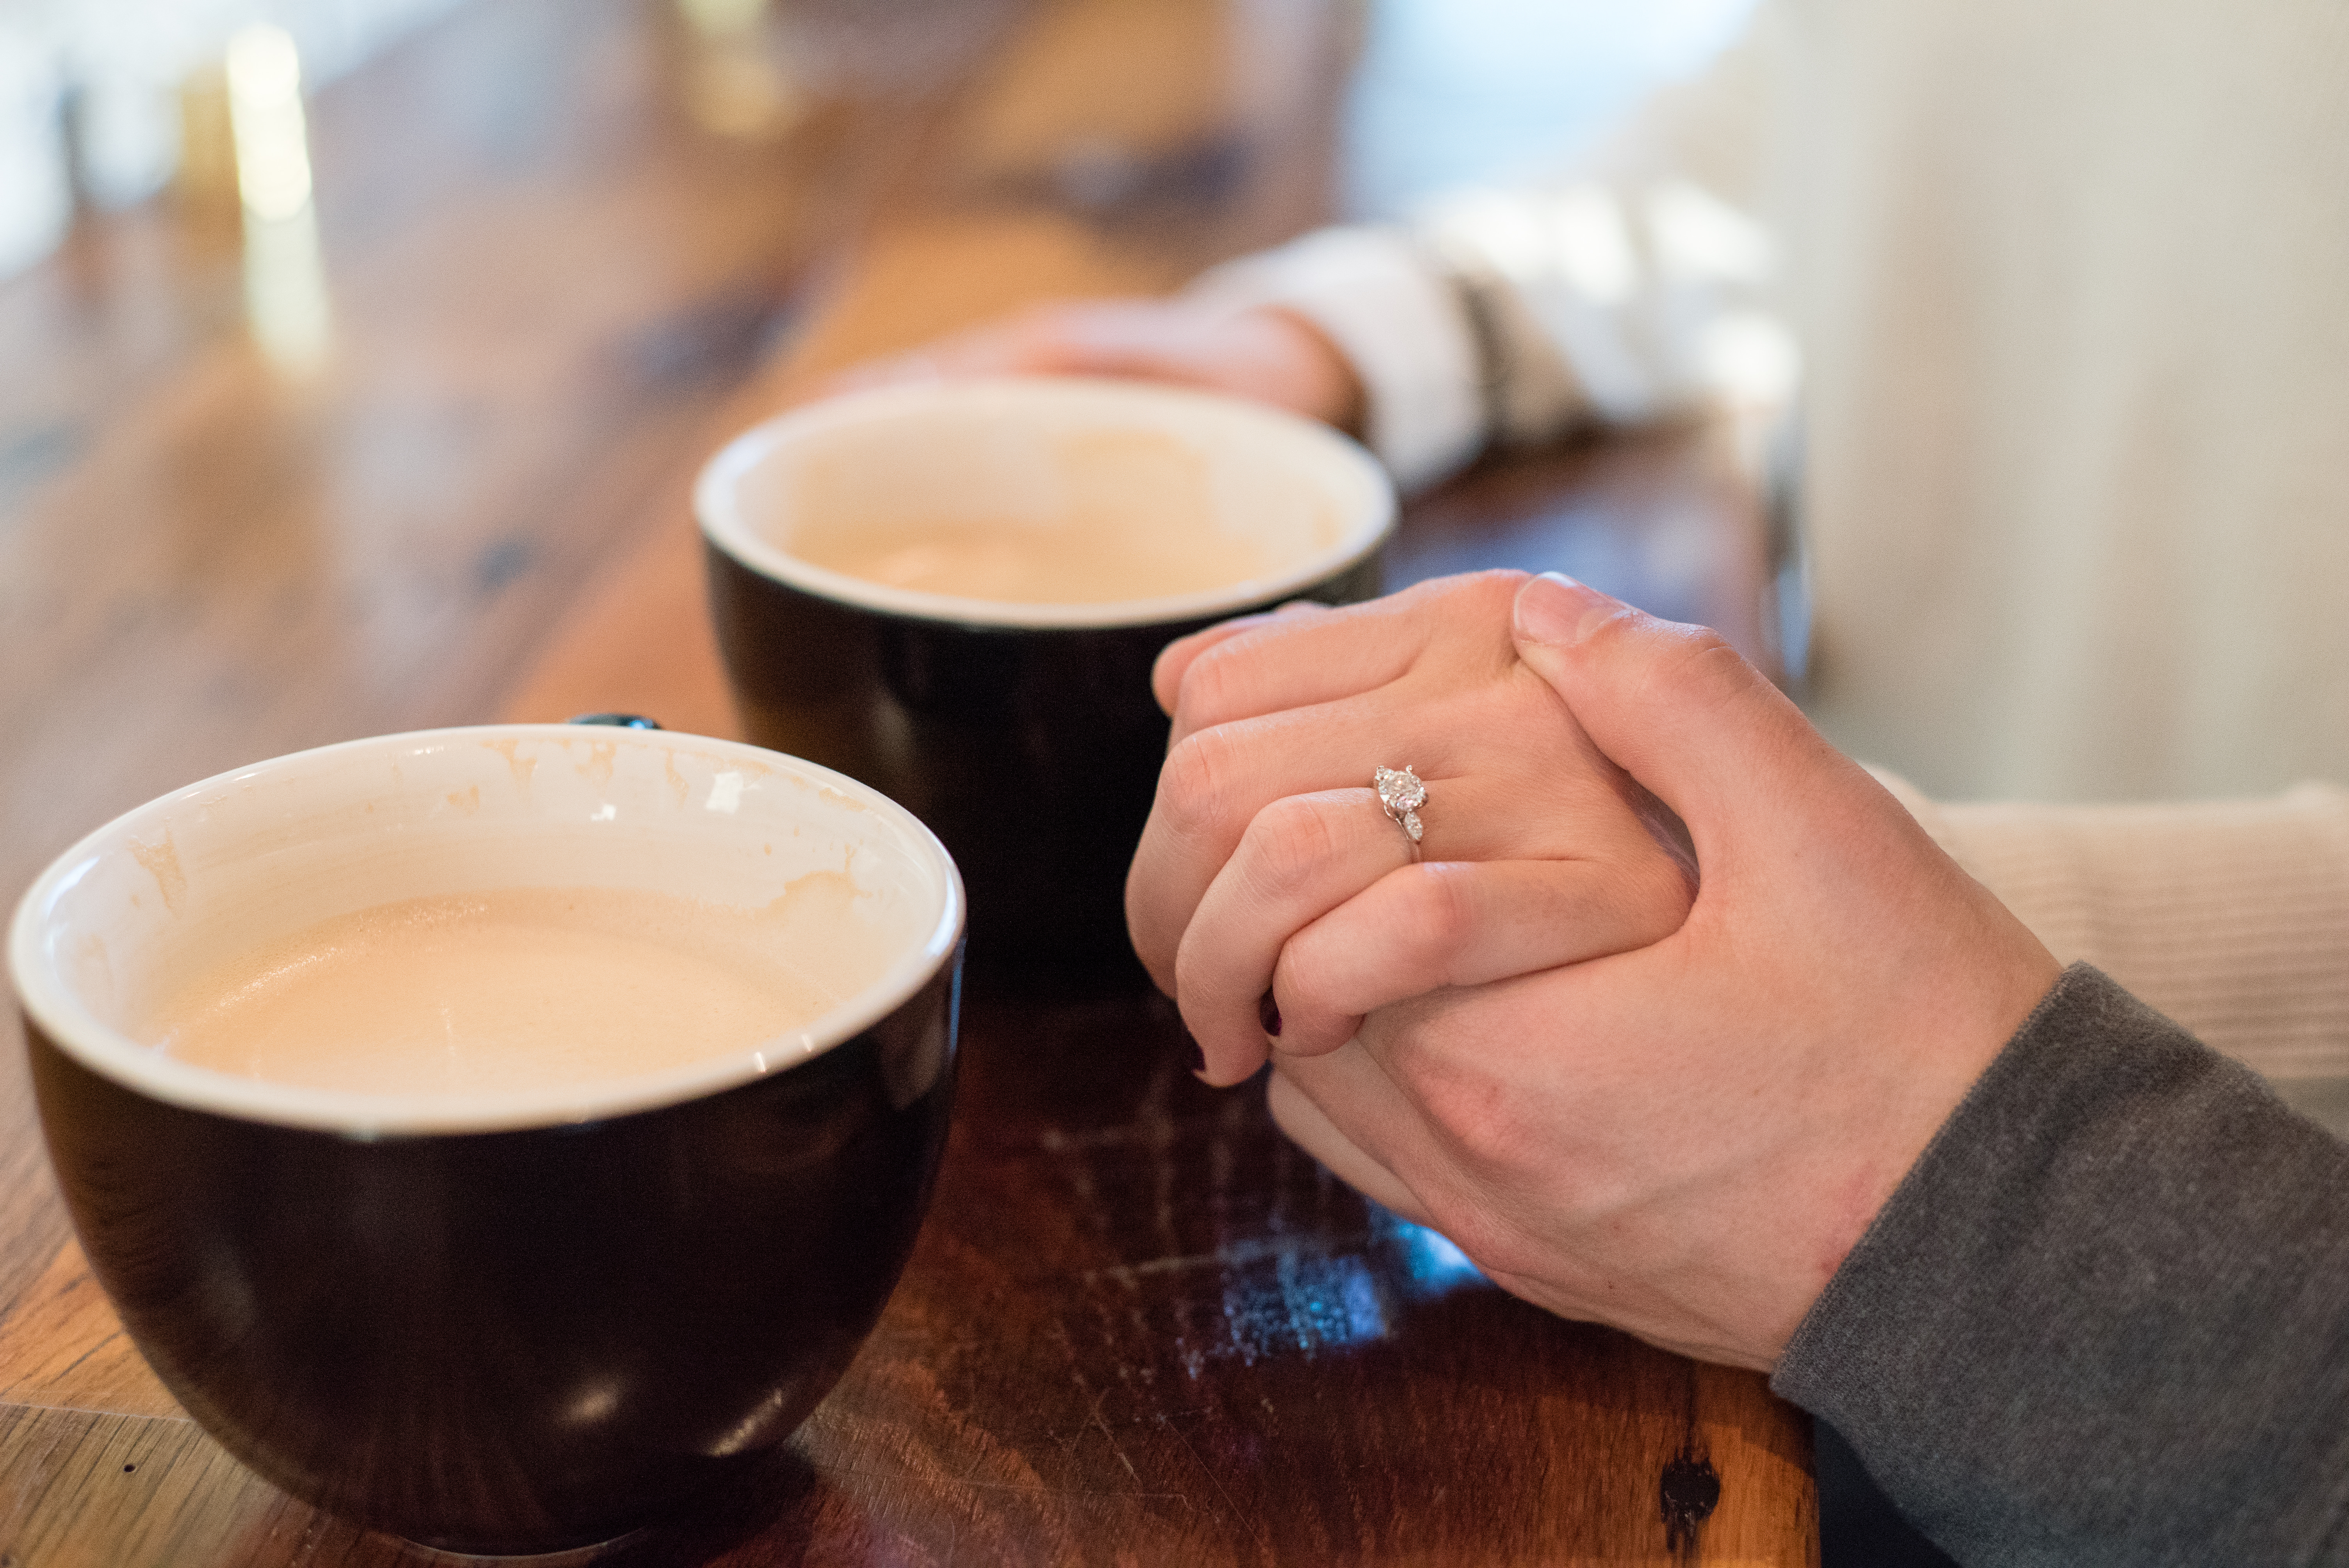 close up of coffee mugs and engagement ring